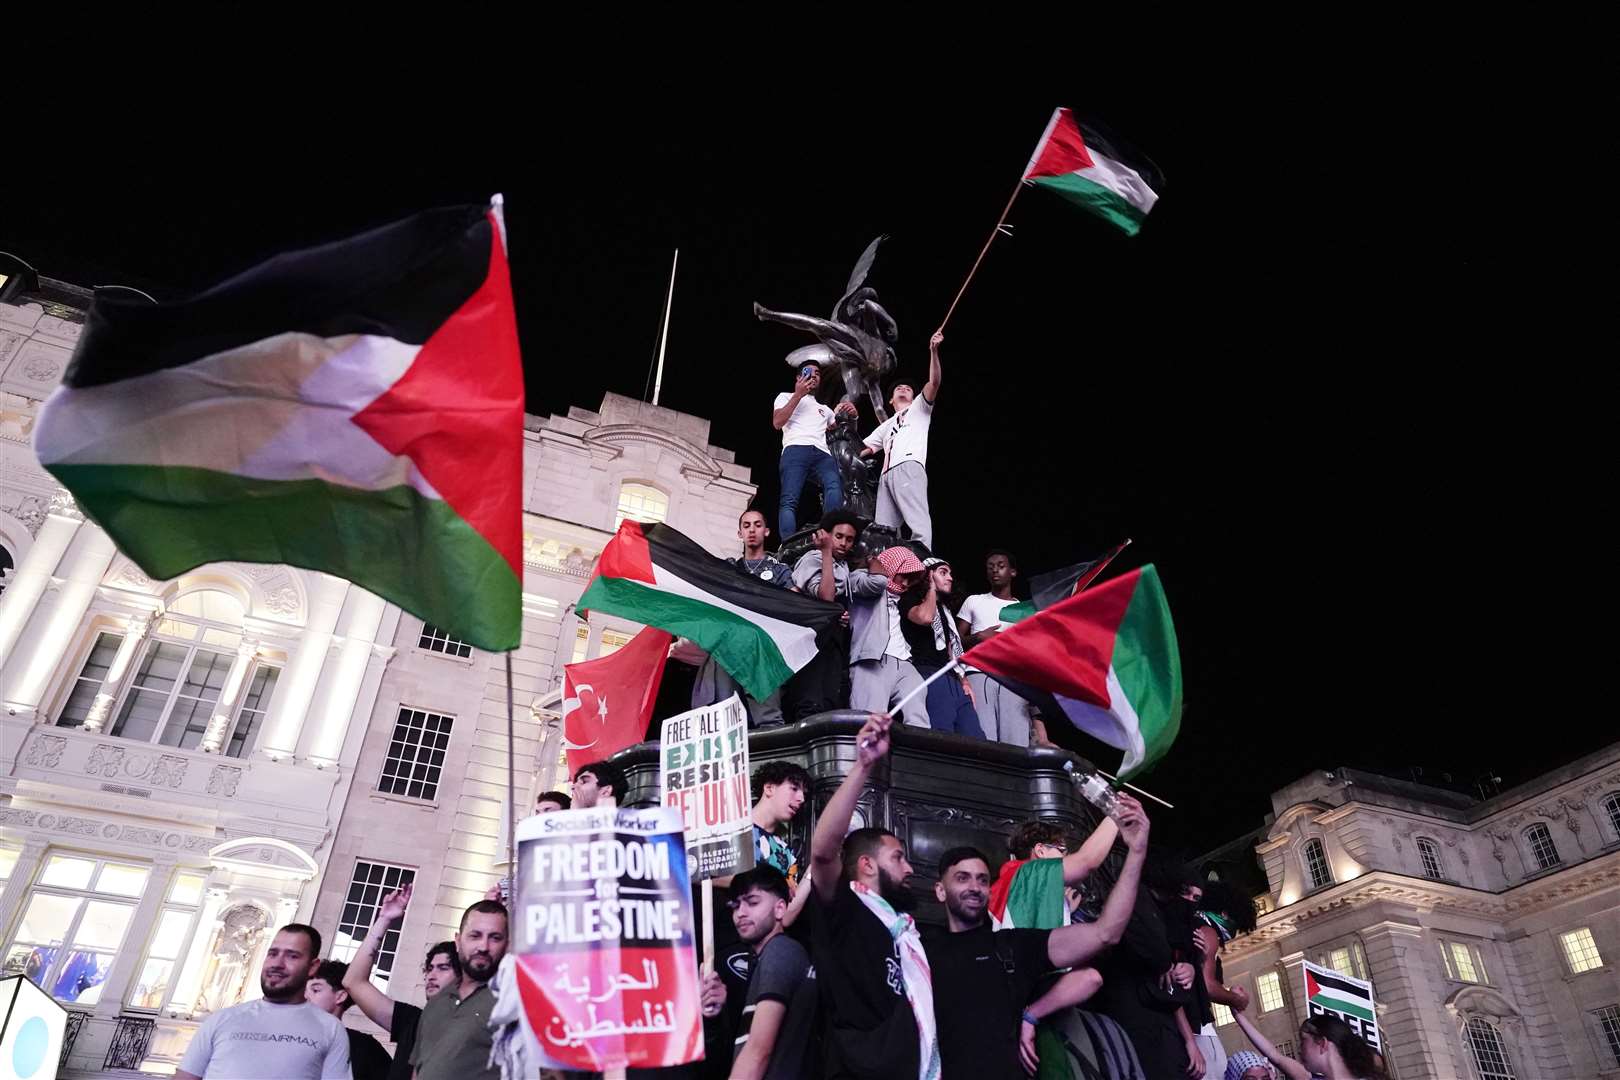 People take part in a Palestine Solidarity Campaign demonstration in London, as the death toll rises amid ongoing violence in Israel and Gaza (Jordan Pettitt/PA)